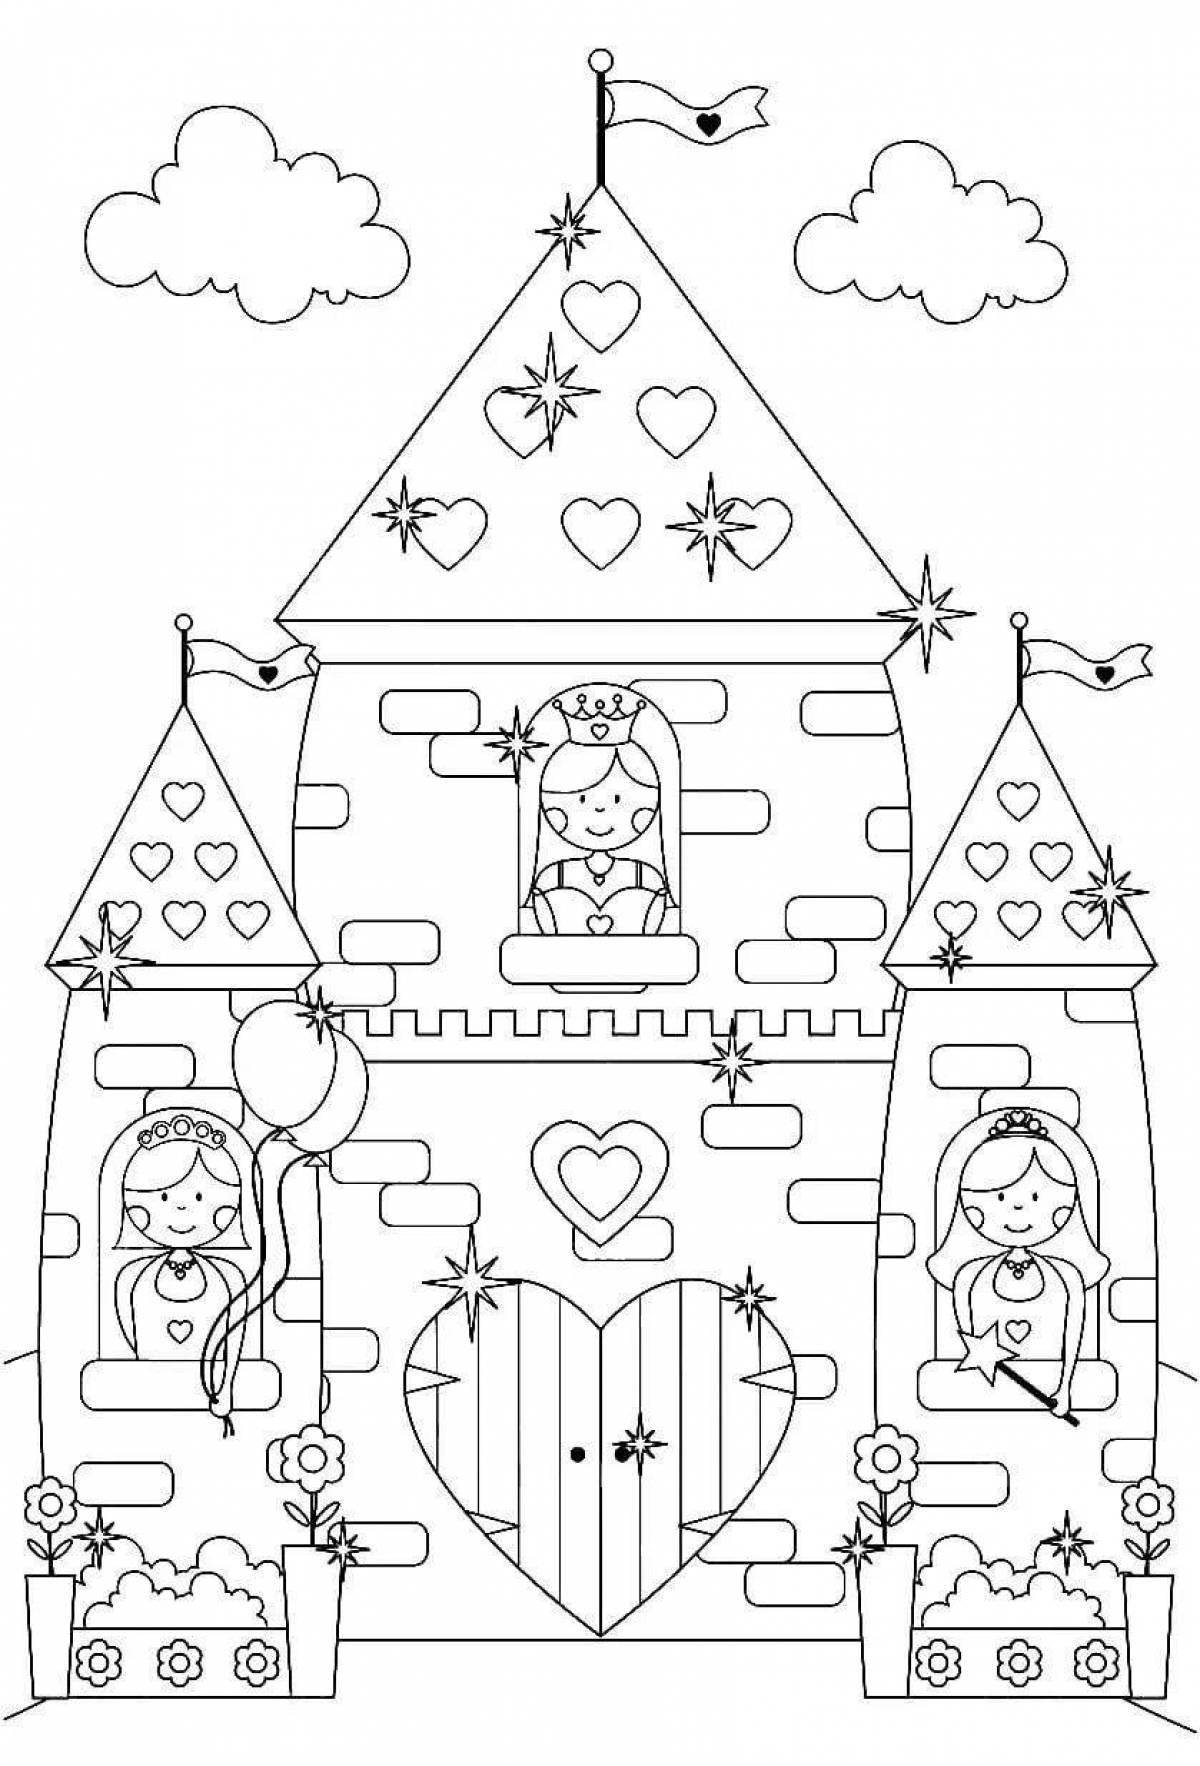 Exquisite princess castle coloring book for kids